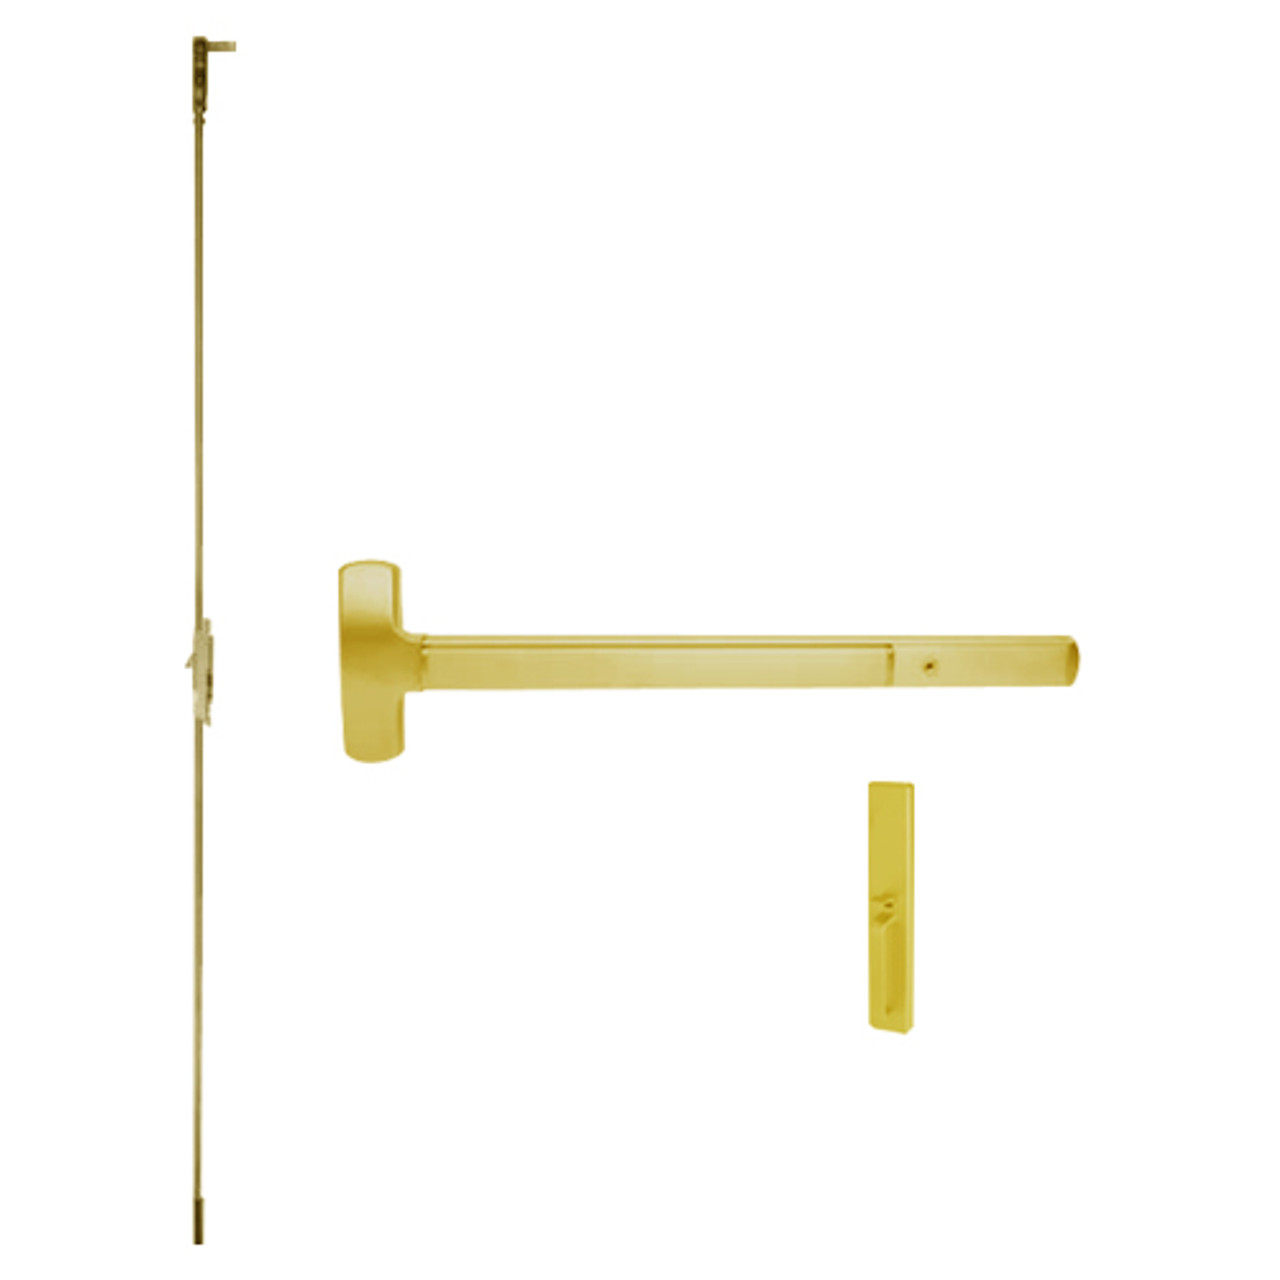 25-C-TP-BE-US4-2 Falcon Exit Device in Satin Brass